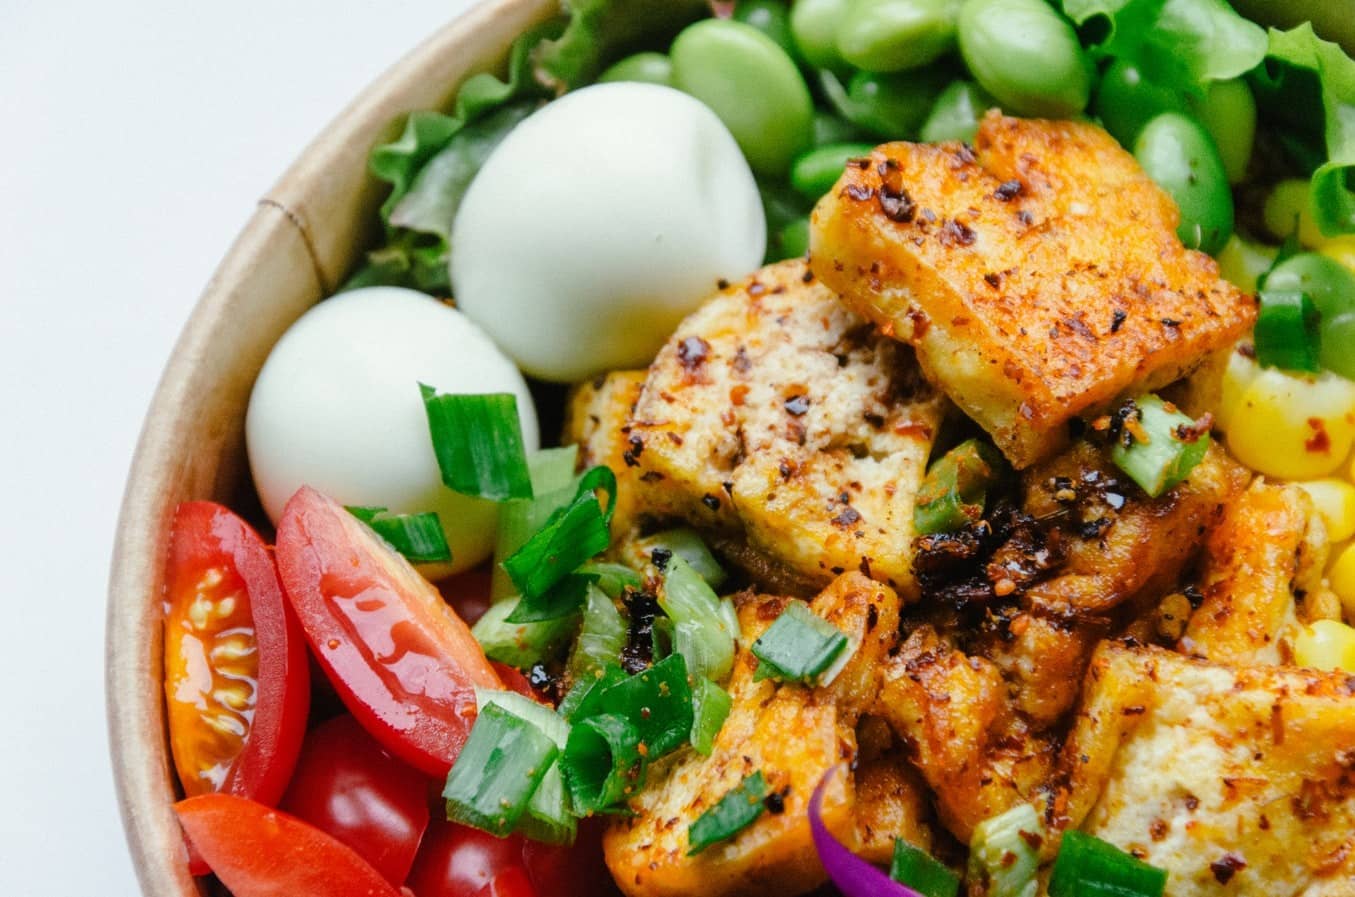 A bowl of tofu with vegetables and hard boiled eggs